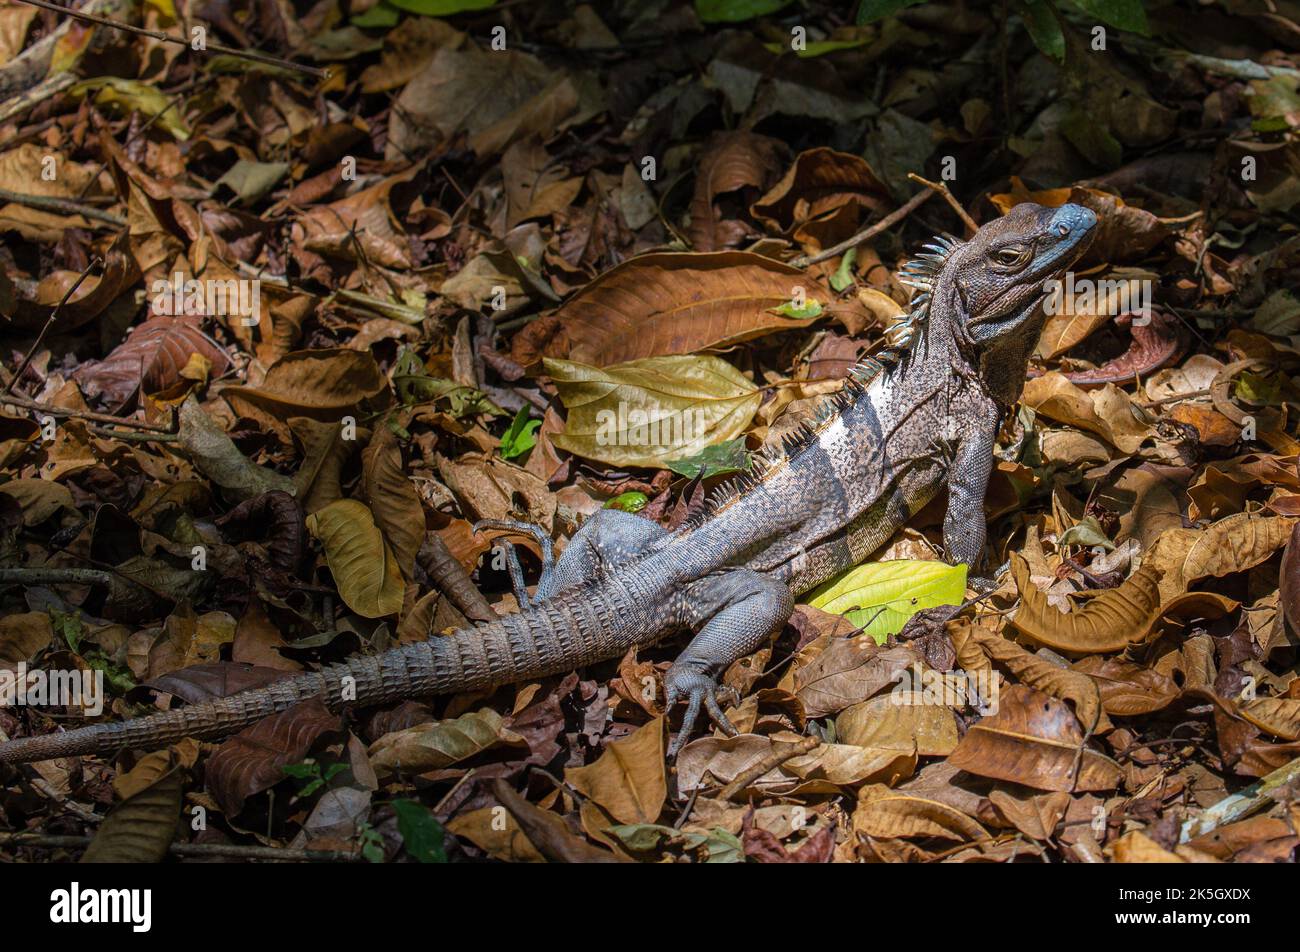 One blue iguana on the ground in Cahuita National Park. Stock Photo